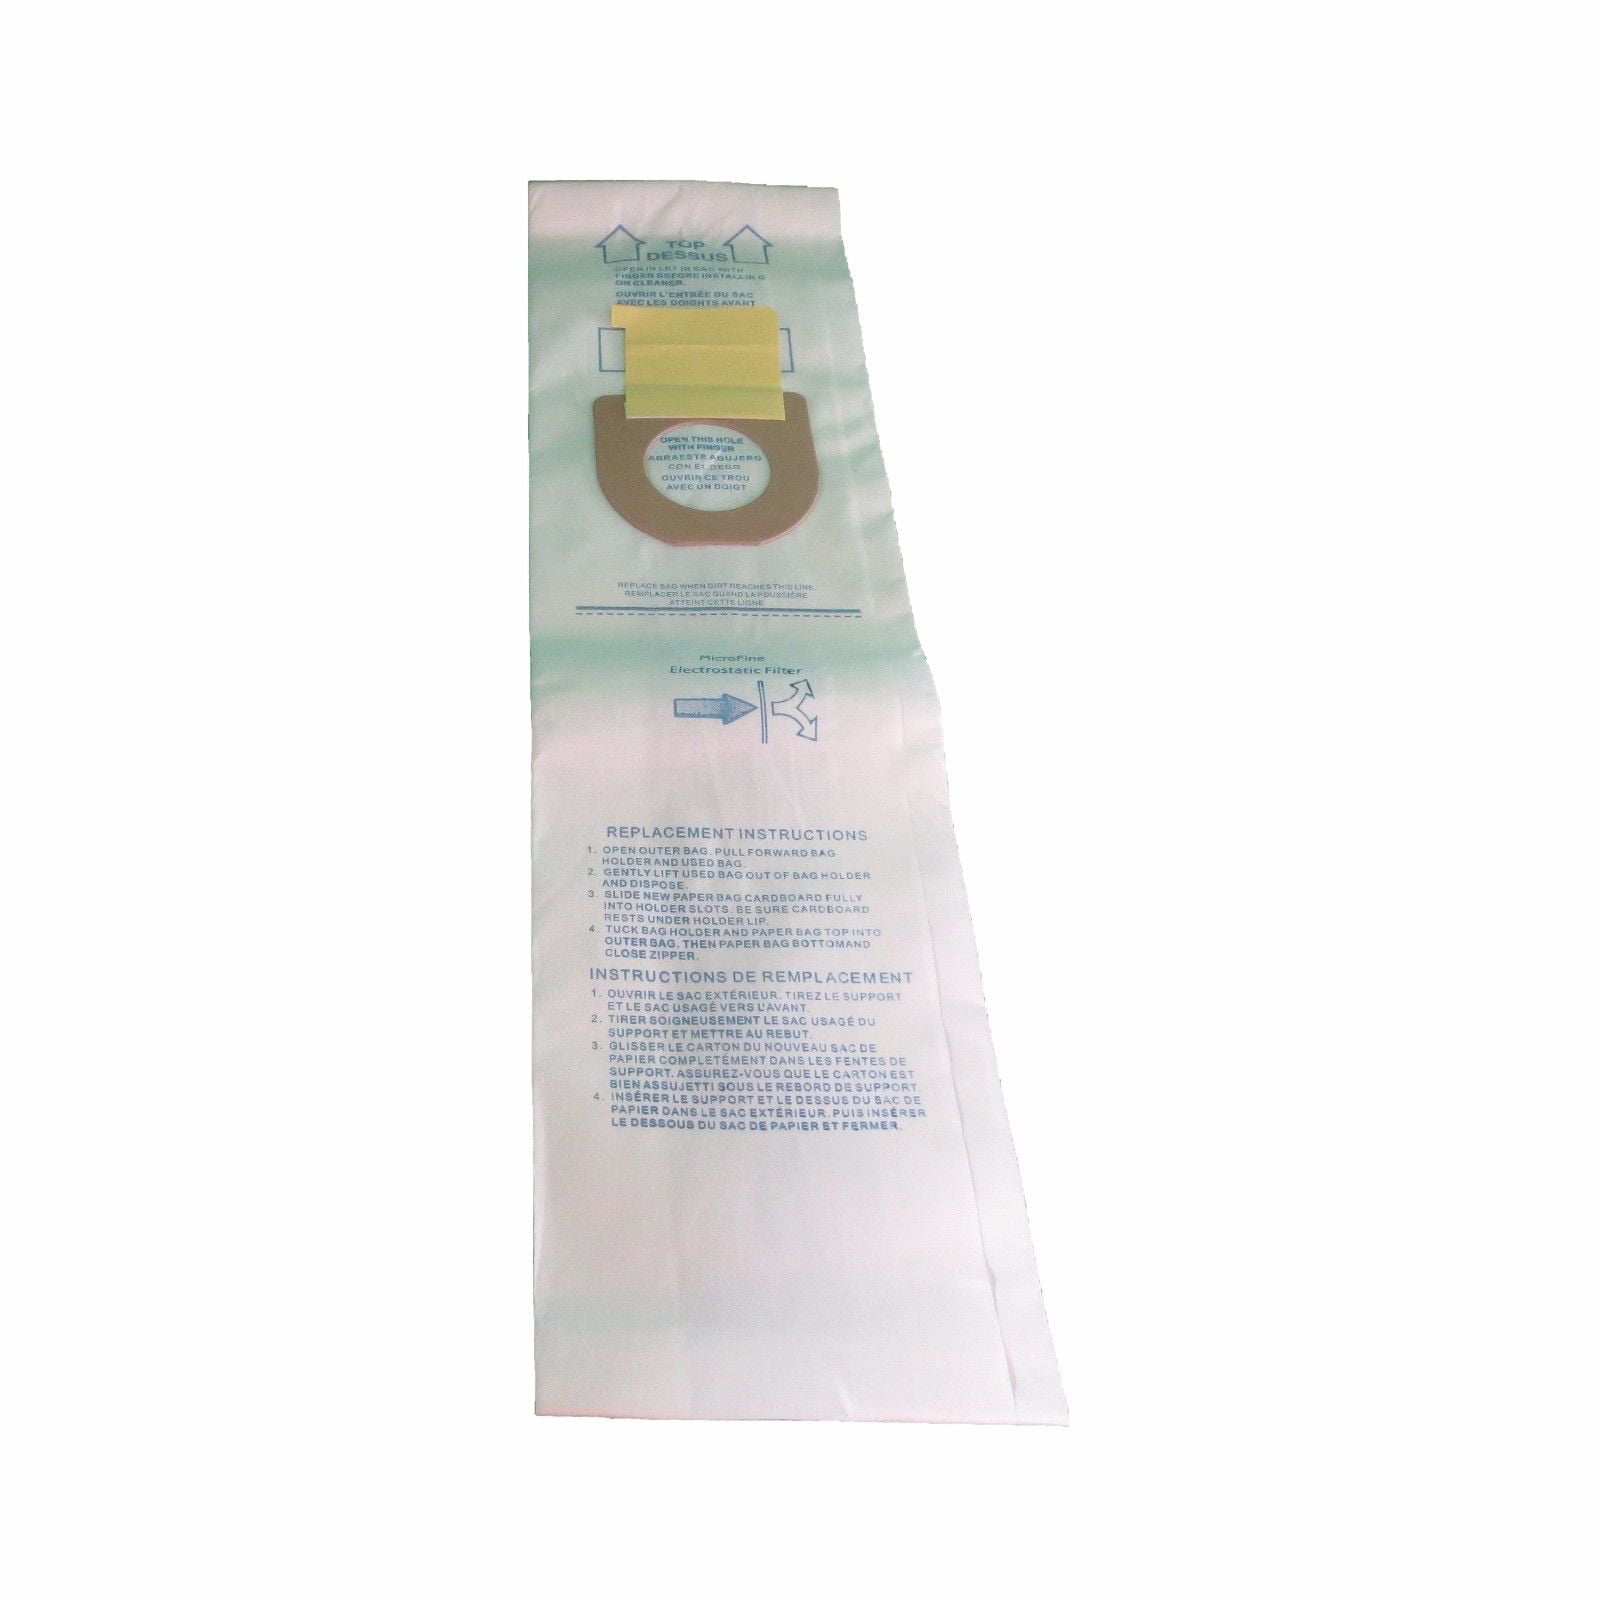 Envirocare [27 Enviro HSA Bags] Genuine Bissell Style 2 SUB-3 Vacuum Bags or After MicroLined Allergen Vac Type